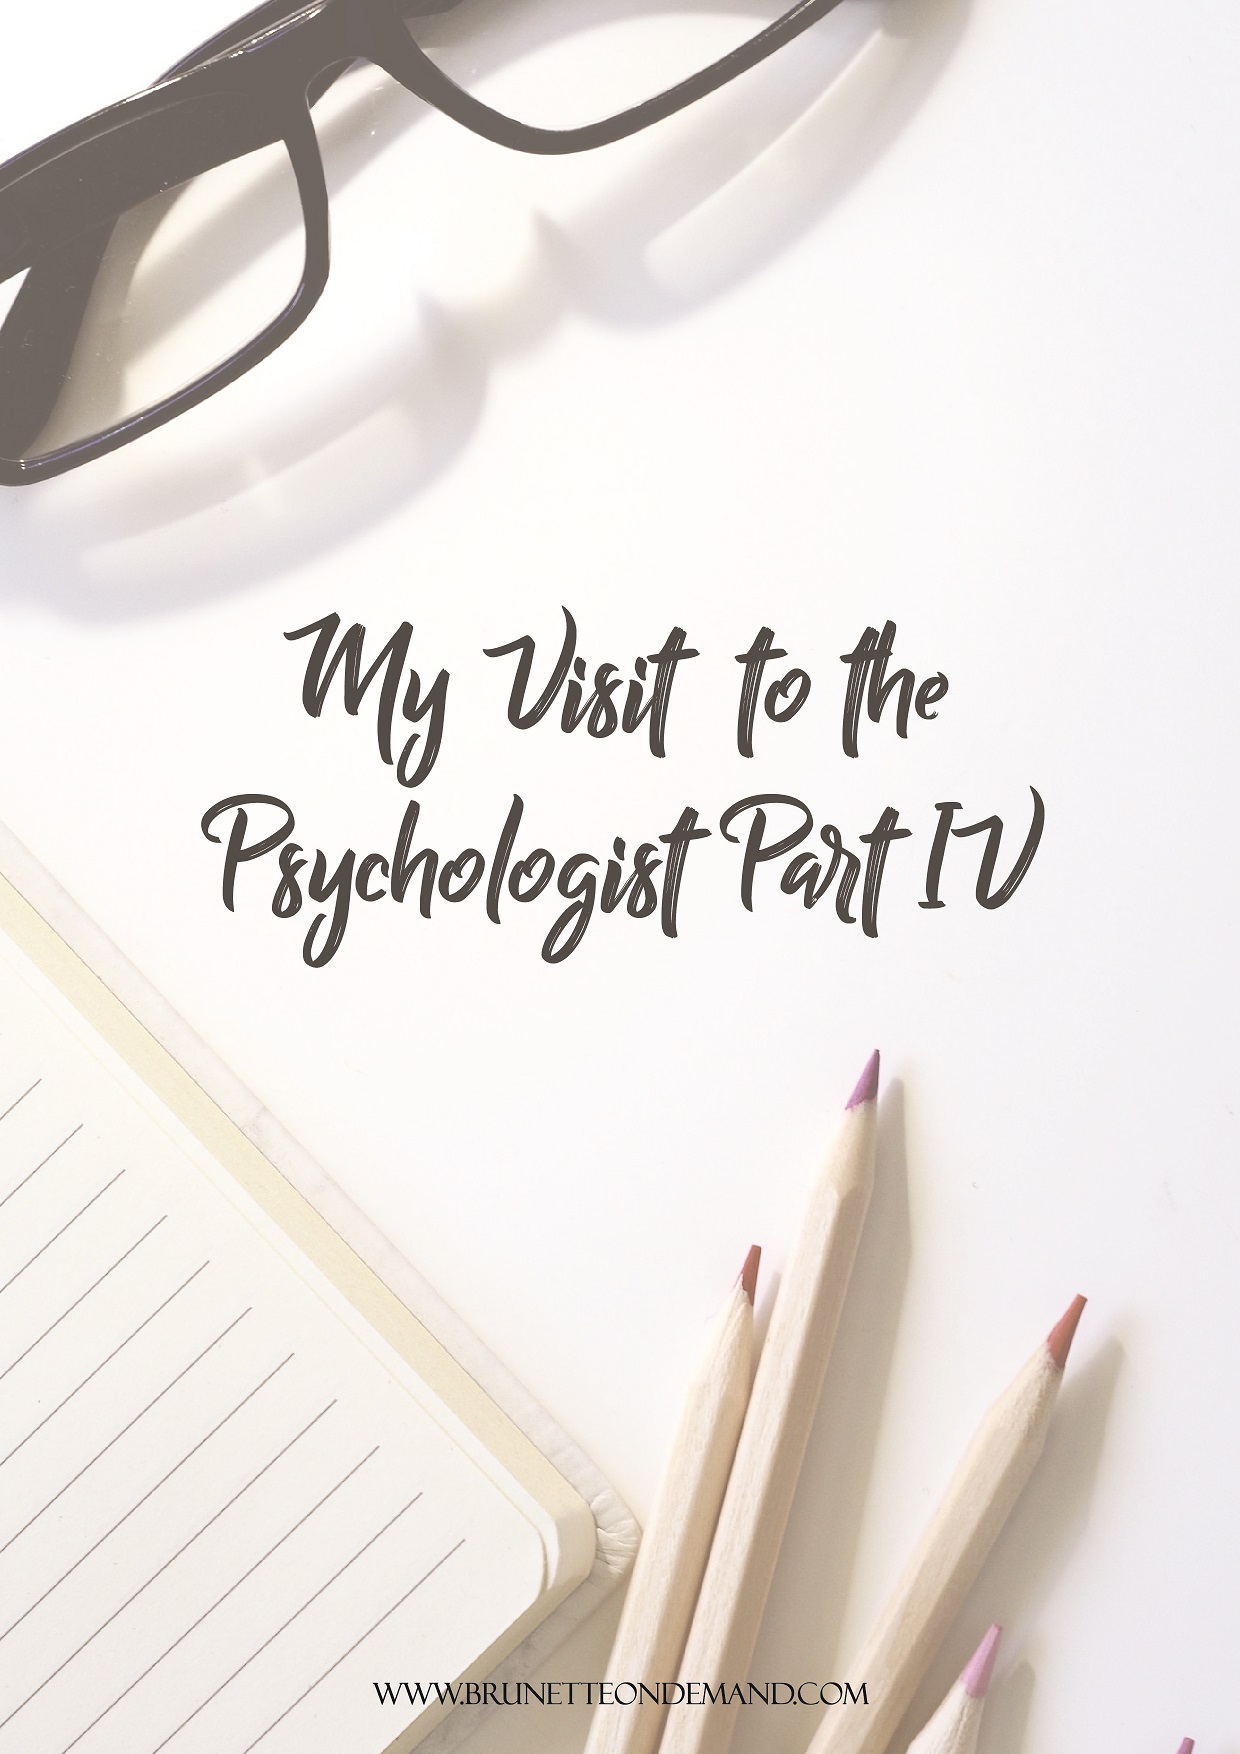 My Visit To The Psychologist Part IV